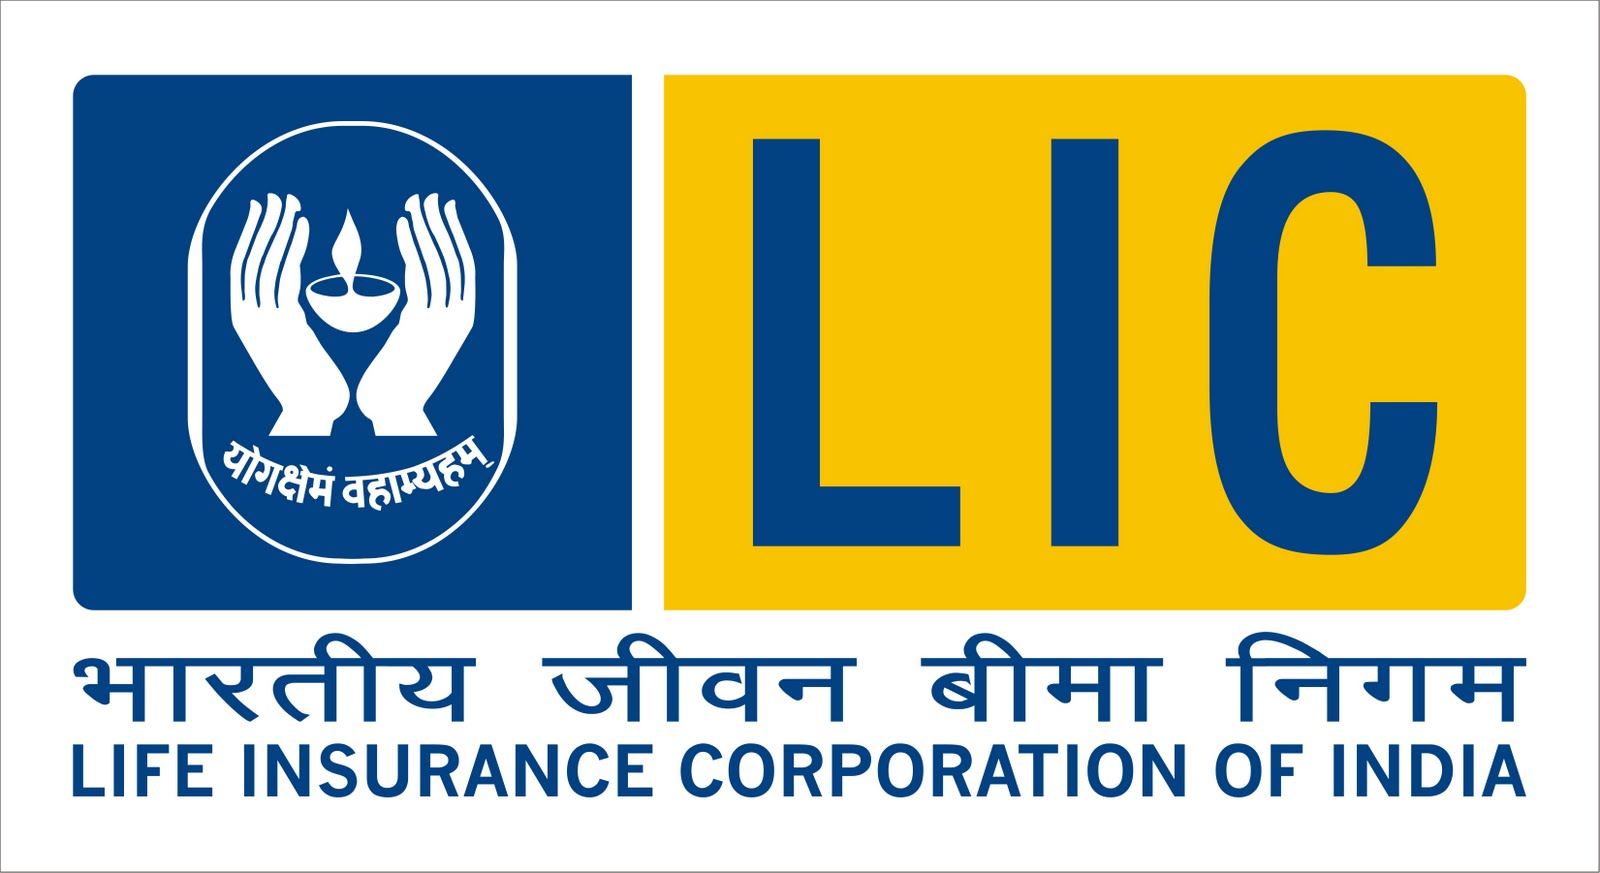 is not prepared by lic india http www getaheadindia in 2013 04 lic ...